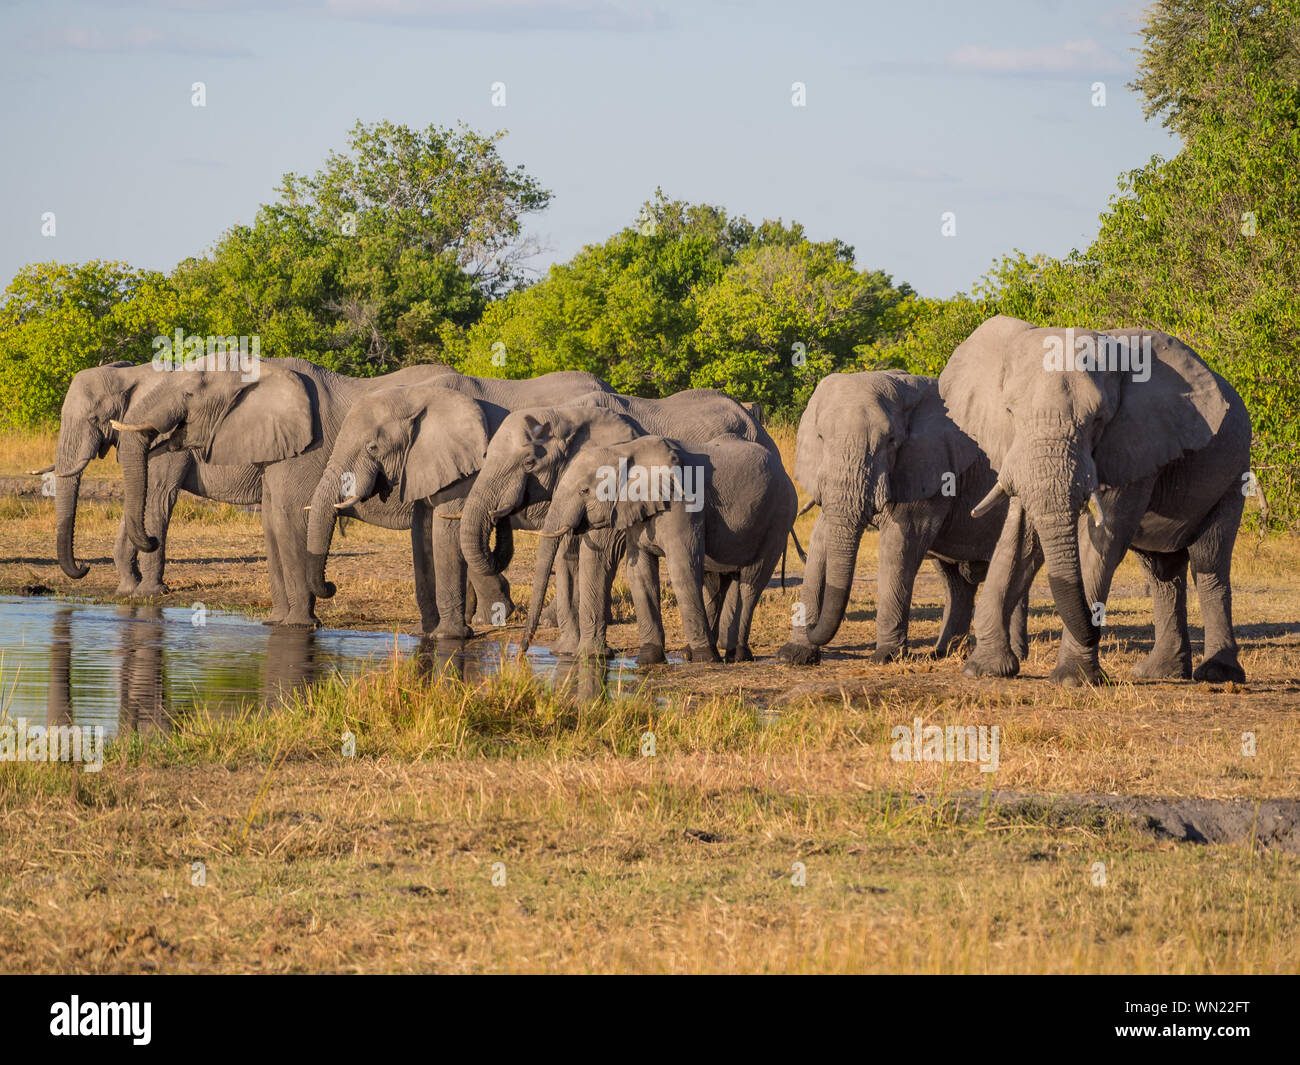 Large Group Of African Elephant Drinking From River Kwai, Moremi Game Reserve, Botswana, Africa Stock Photo